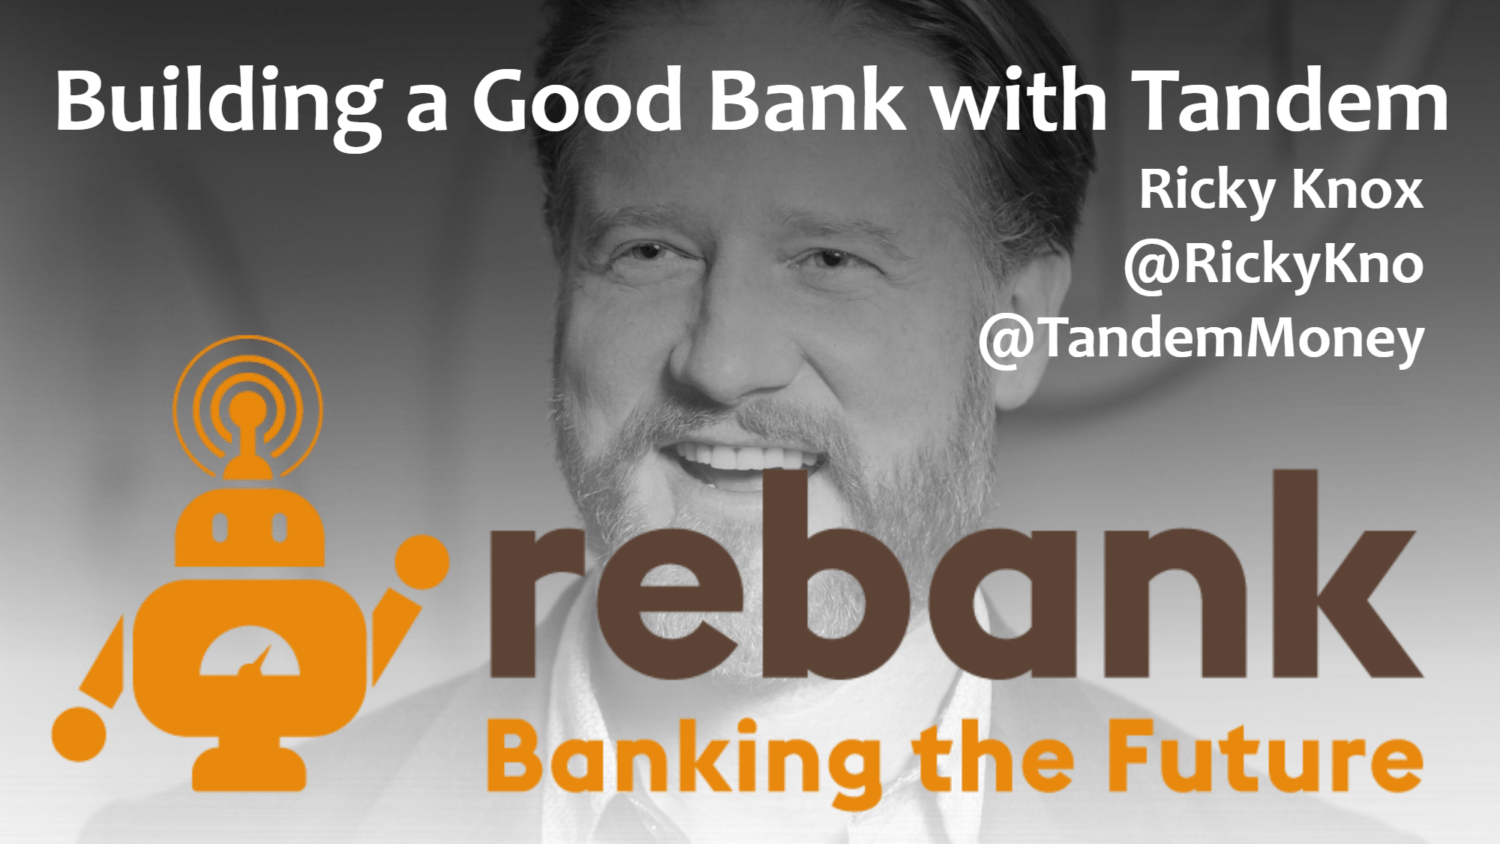 Building a Good Bank with Tandem